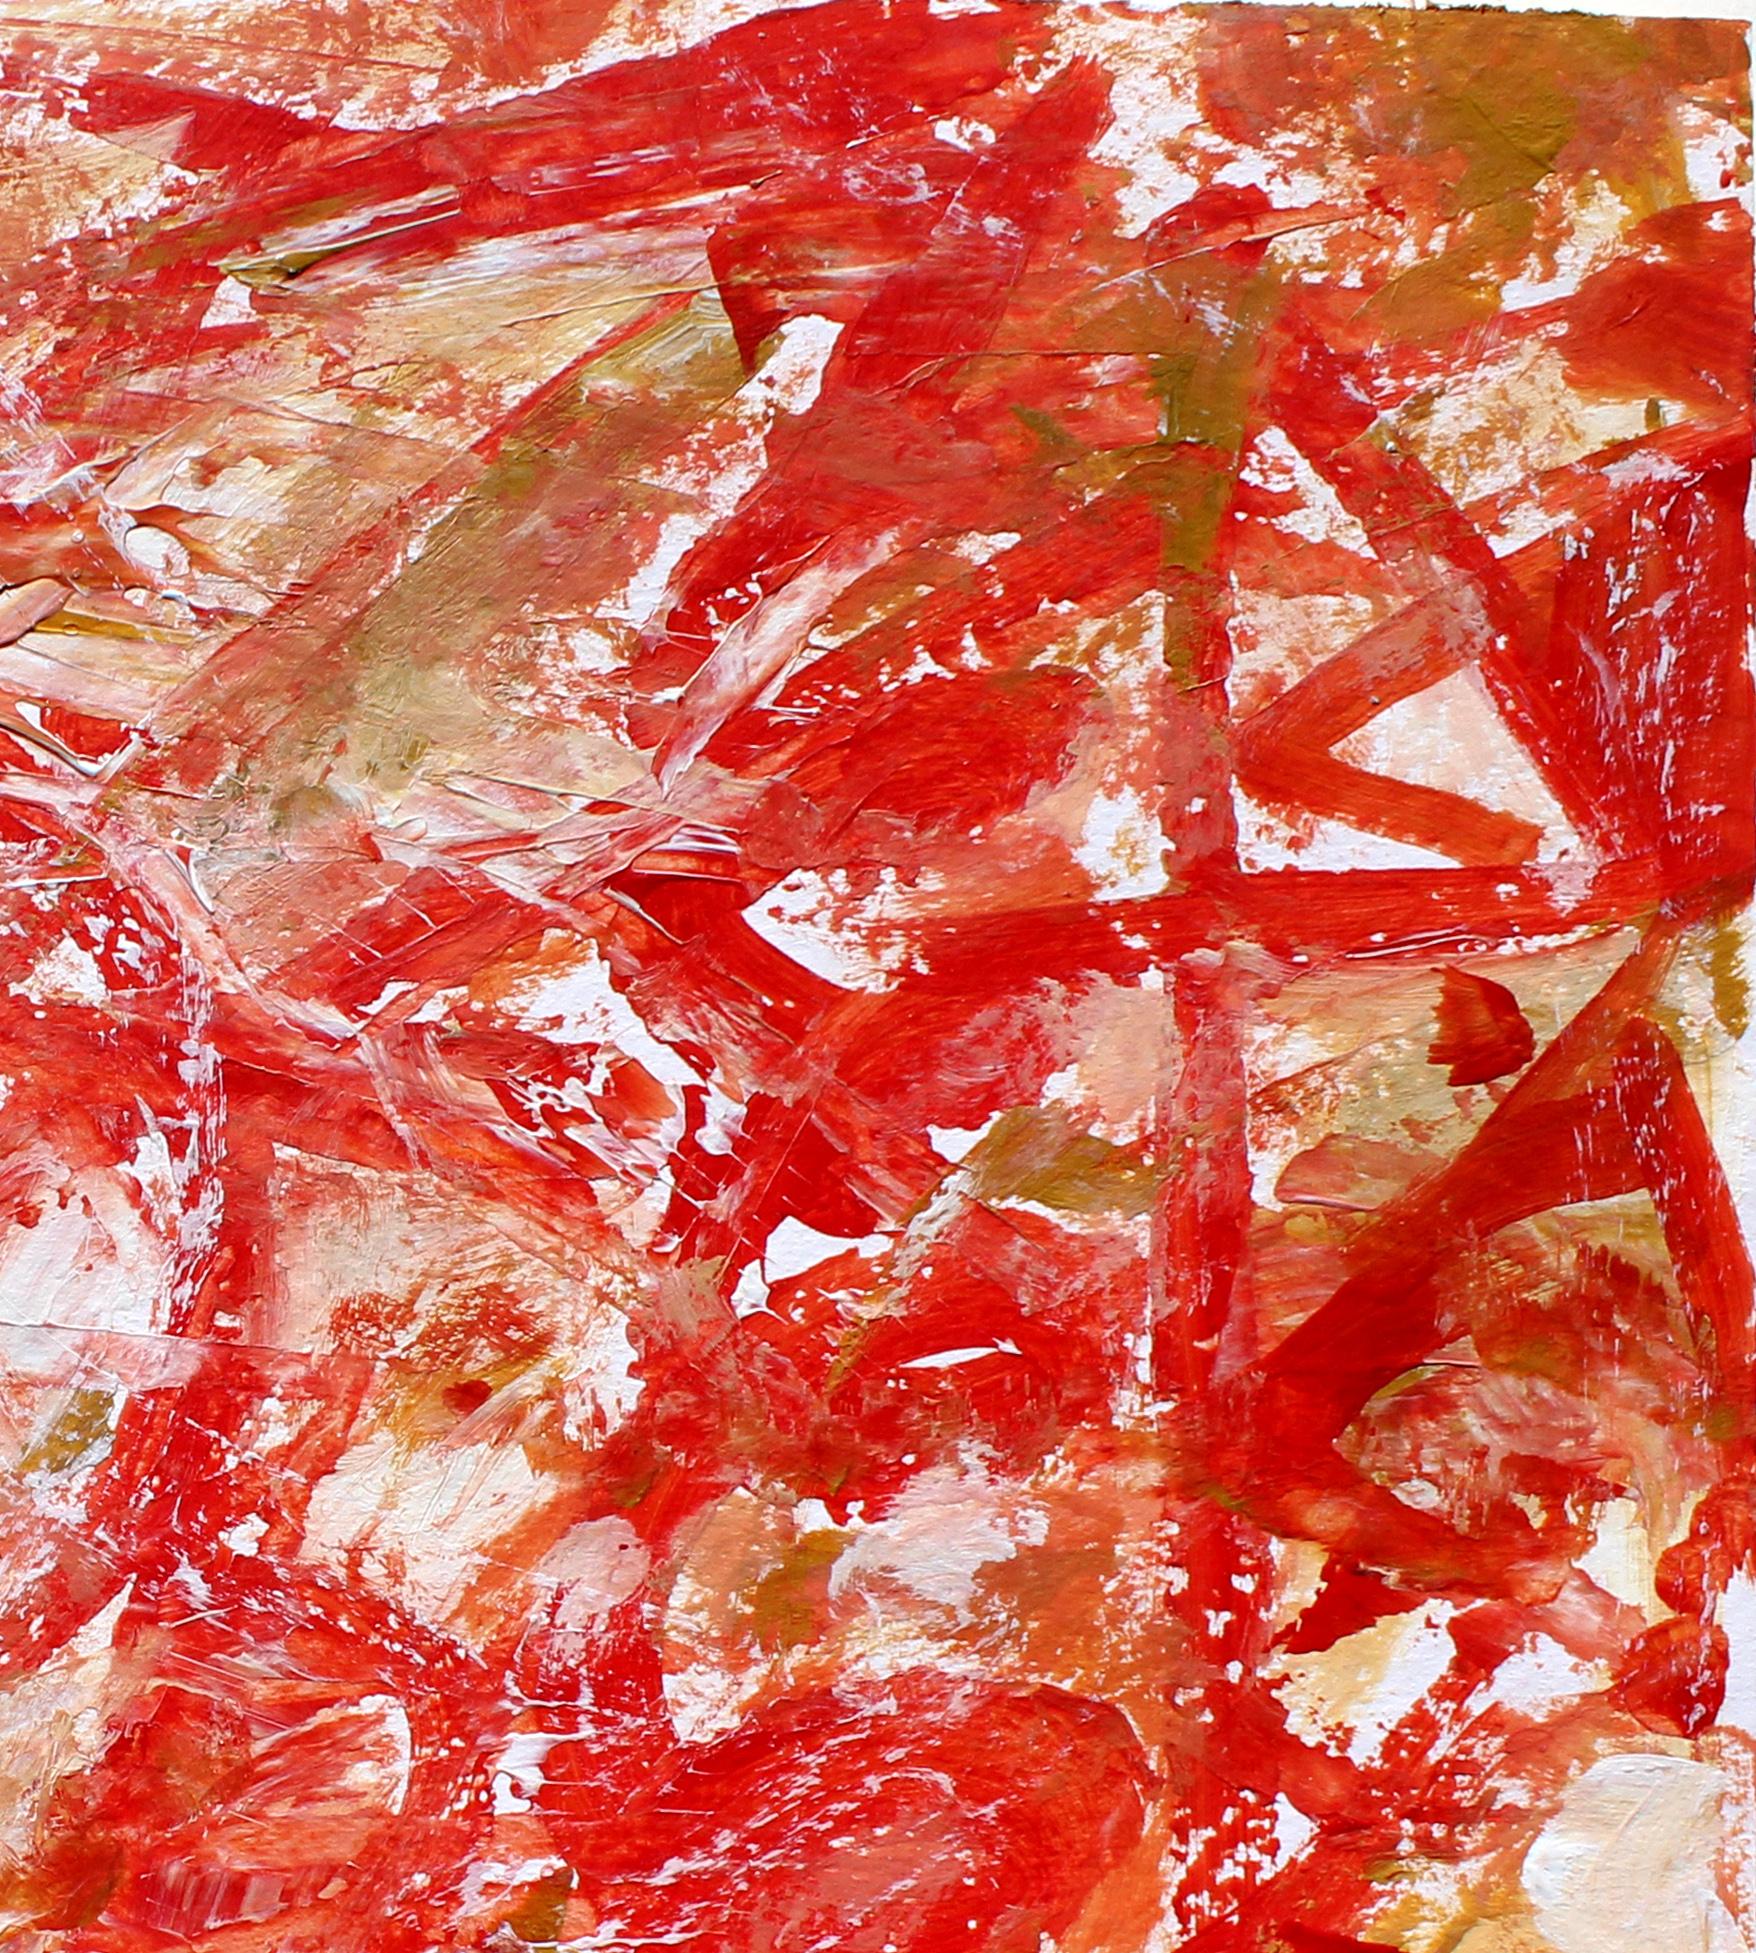 Red and Tan, Untitled, archived no. 47 - Orange Abstract Painting by Harry Bertschmann